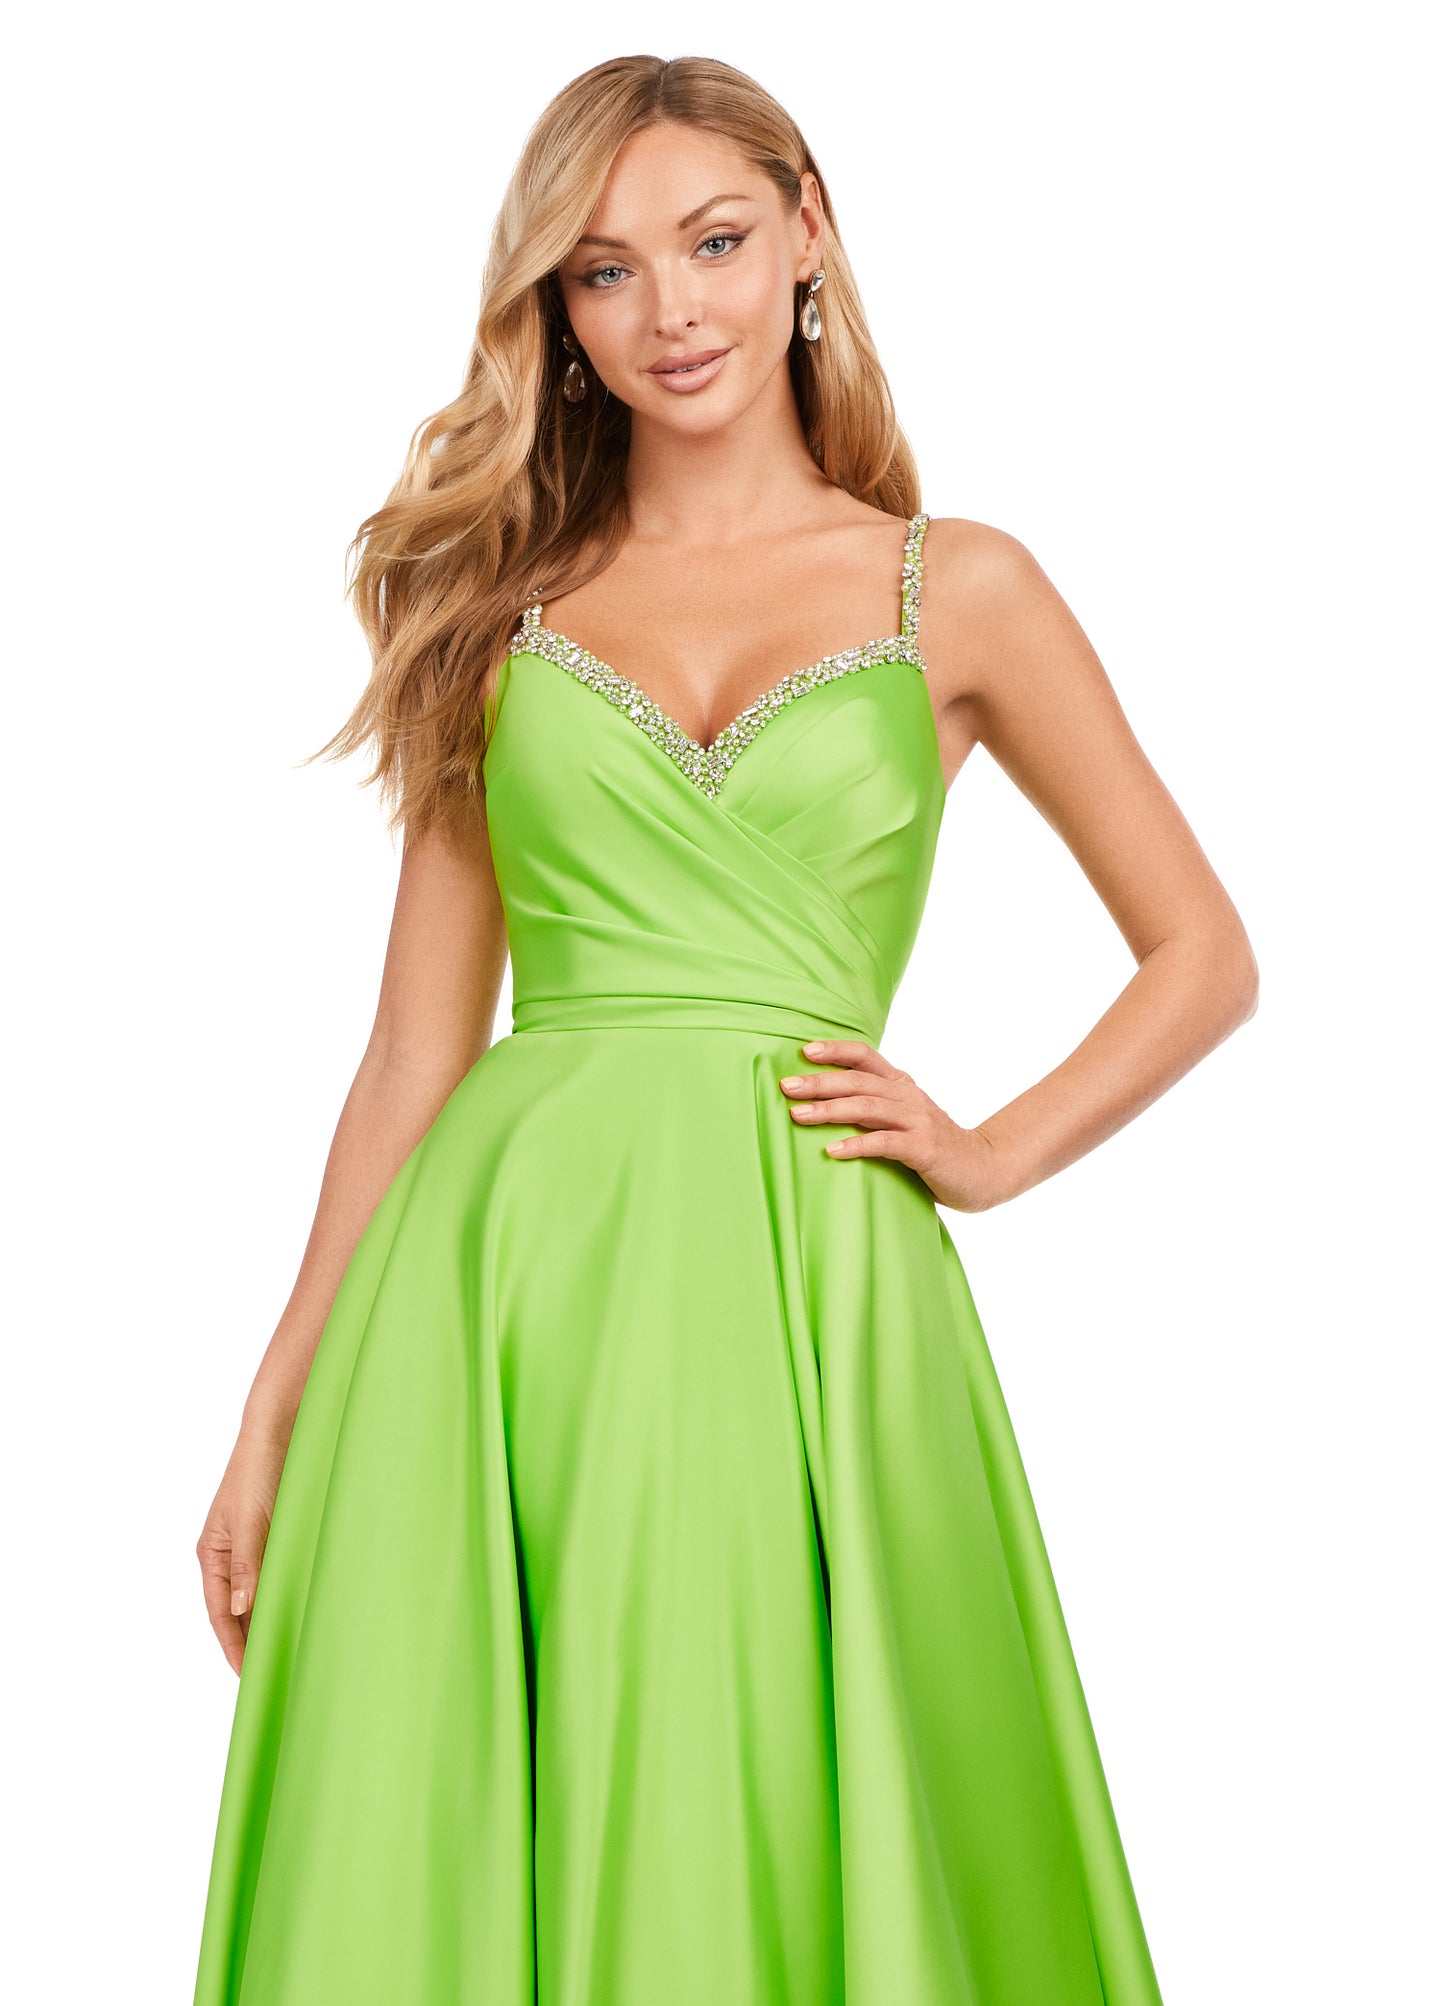 Ashley Lauren 11267 Spaghetti Strap Heavy Satin Crystal Beading Bustier A-Line Ballgown Formal Dress. Turn heads in this beautiful A-line gown, featuring spaghetti straps and eye catching crystal beading. The bustier is complete with asymmetrical ruching to perfectly accentuate your curves.